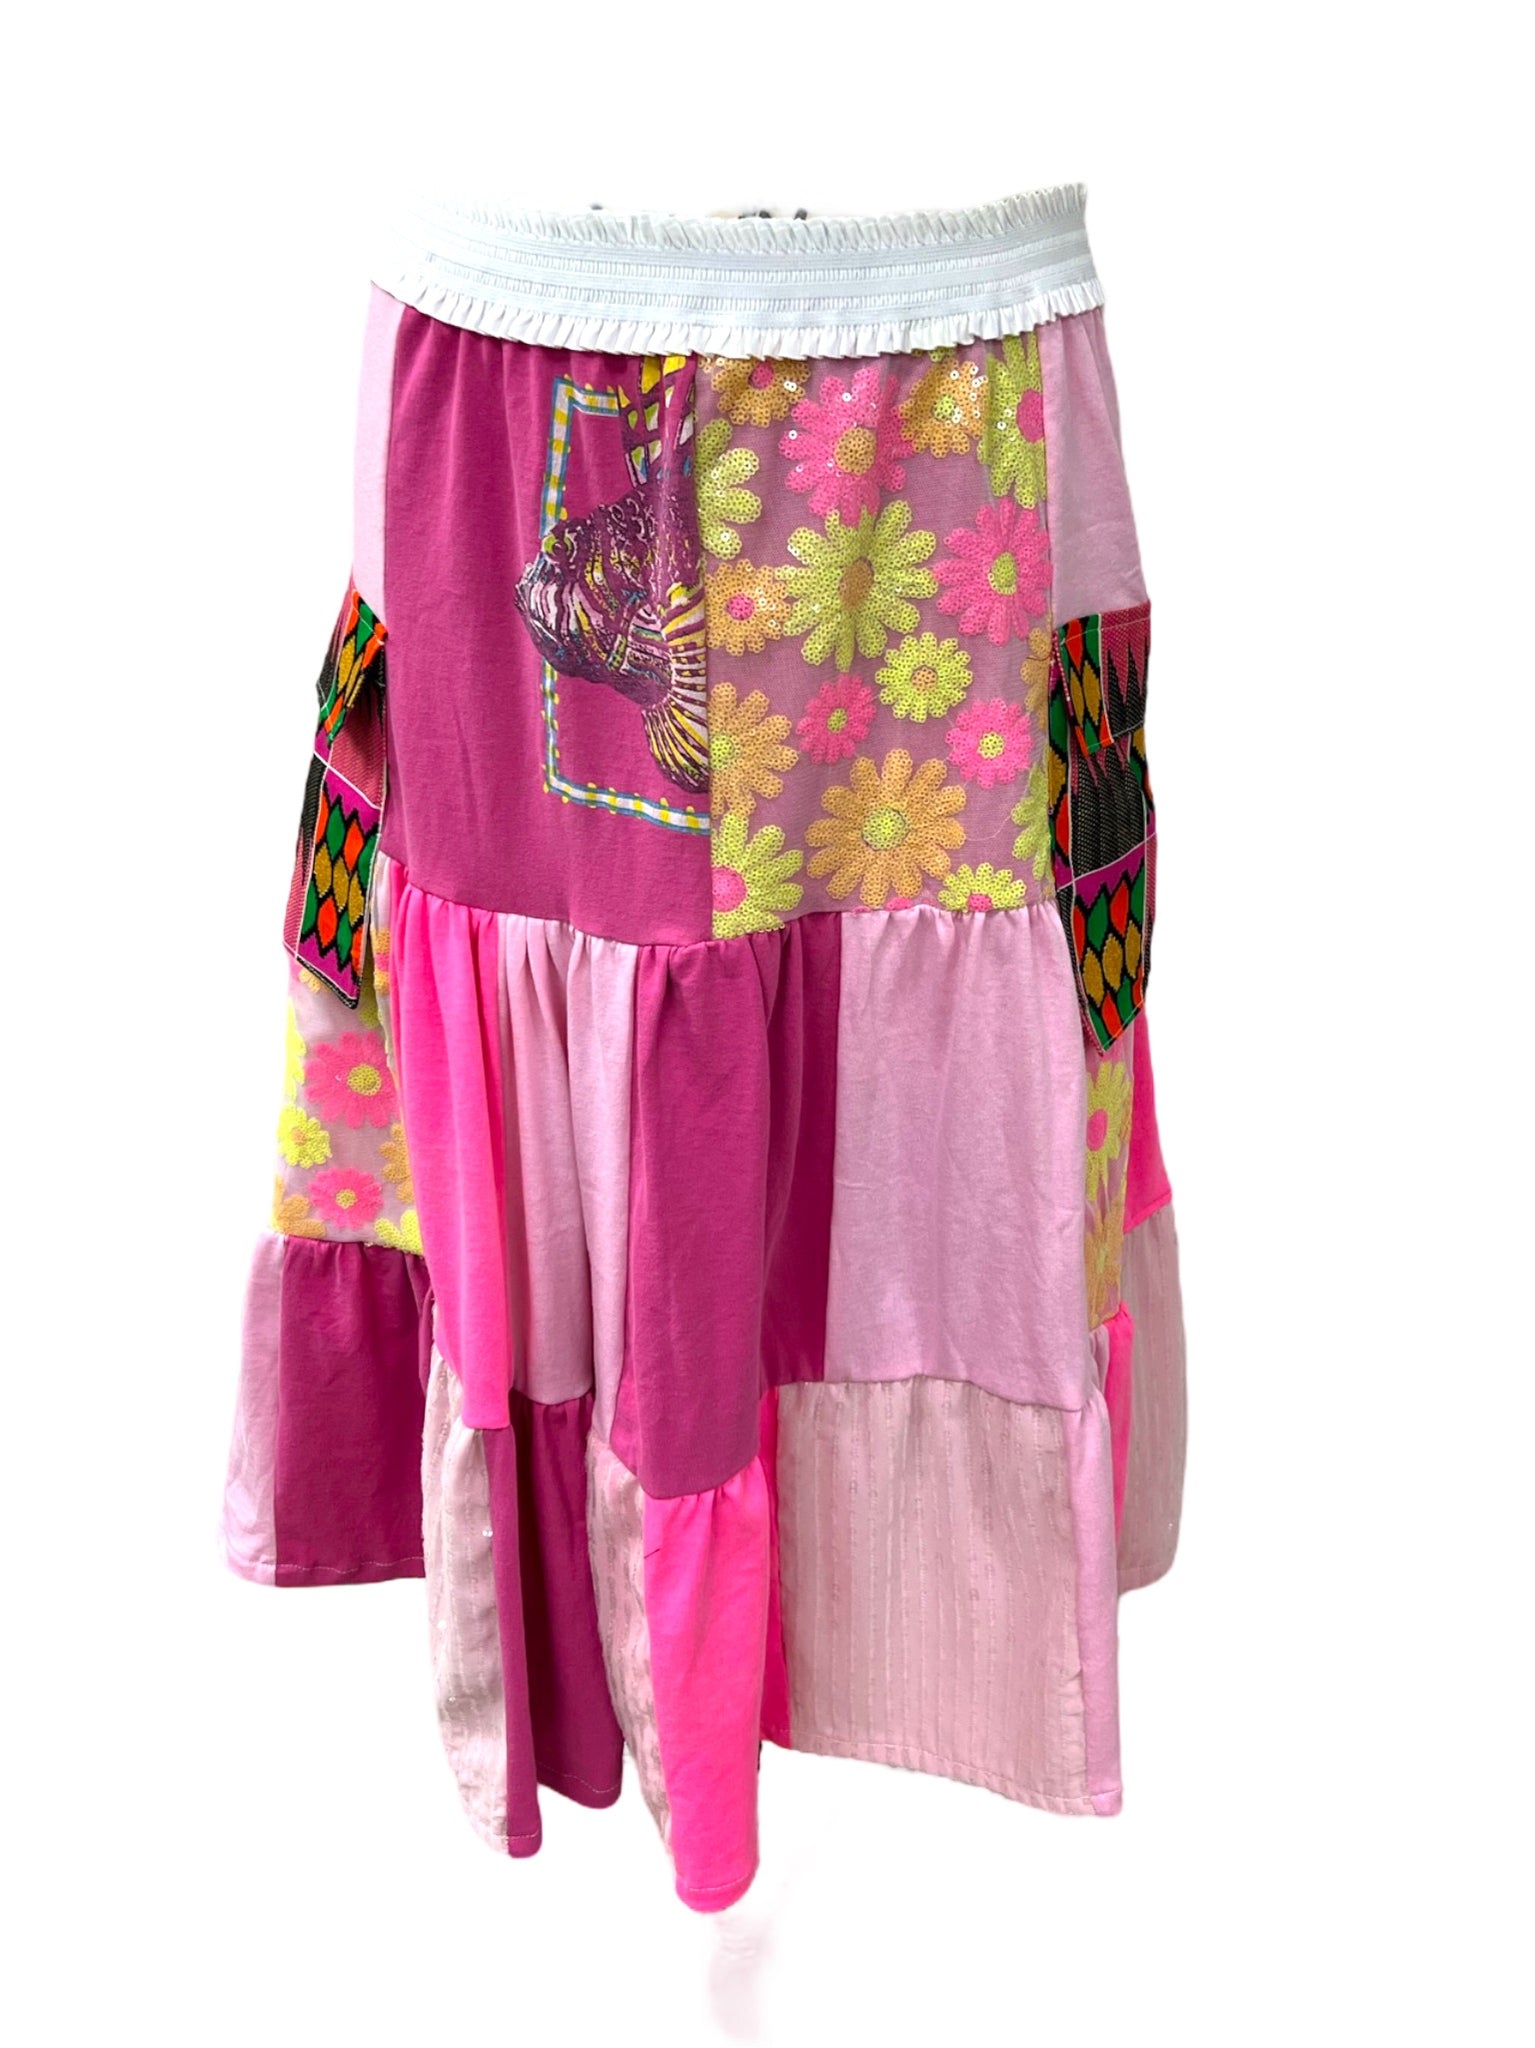 "Pretty in Pink" Daisy Skirt